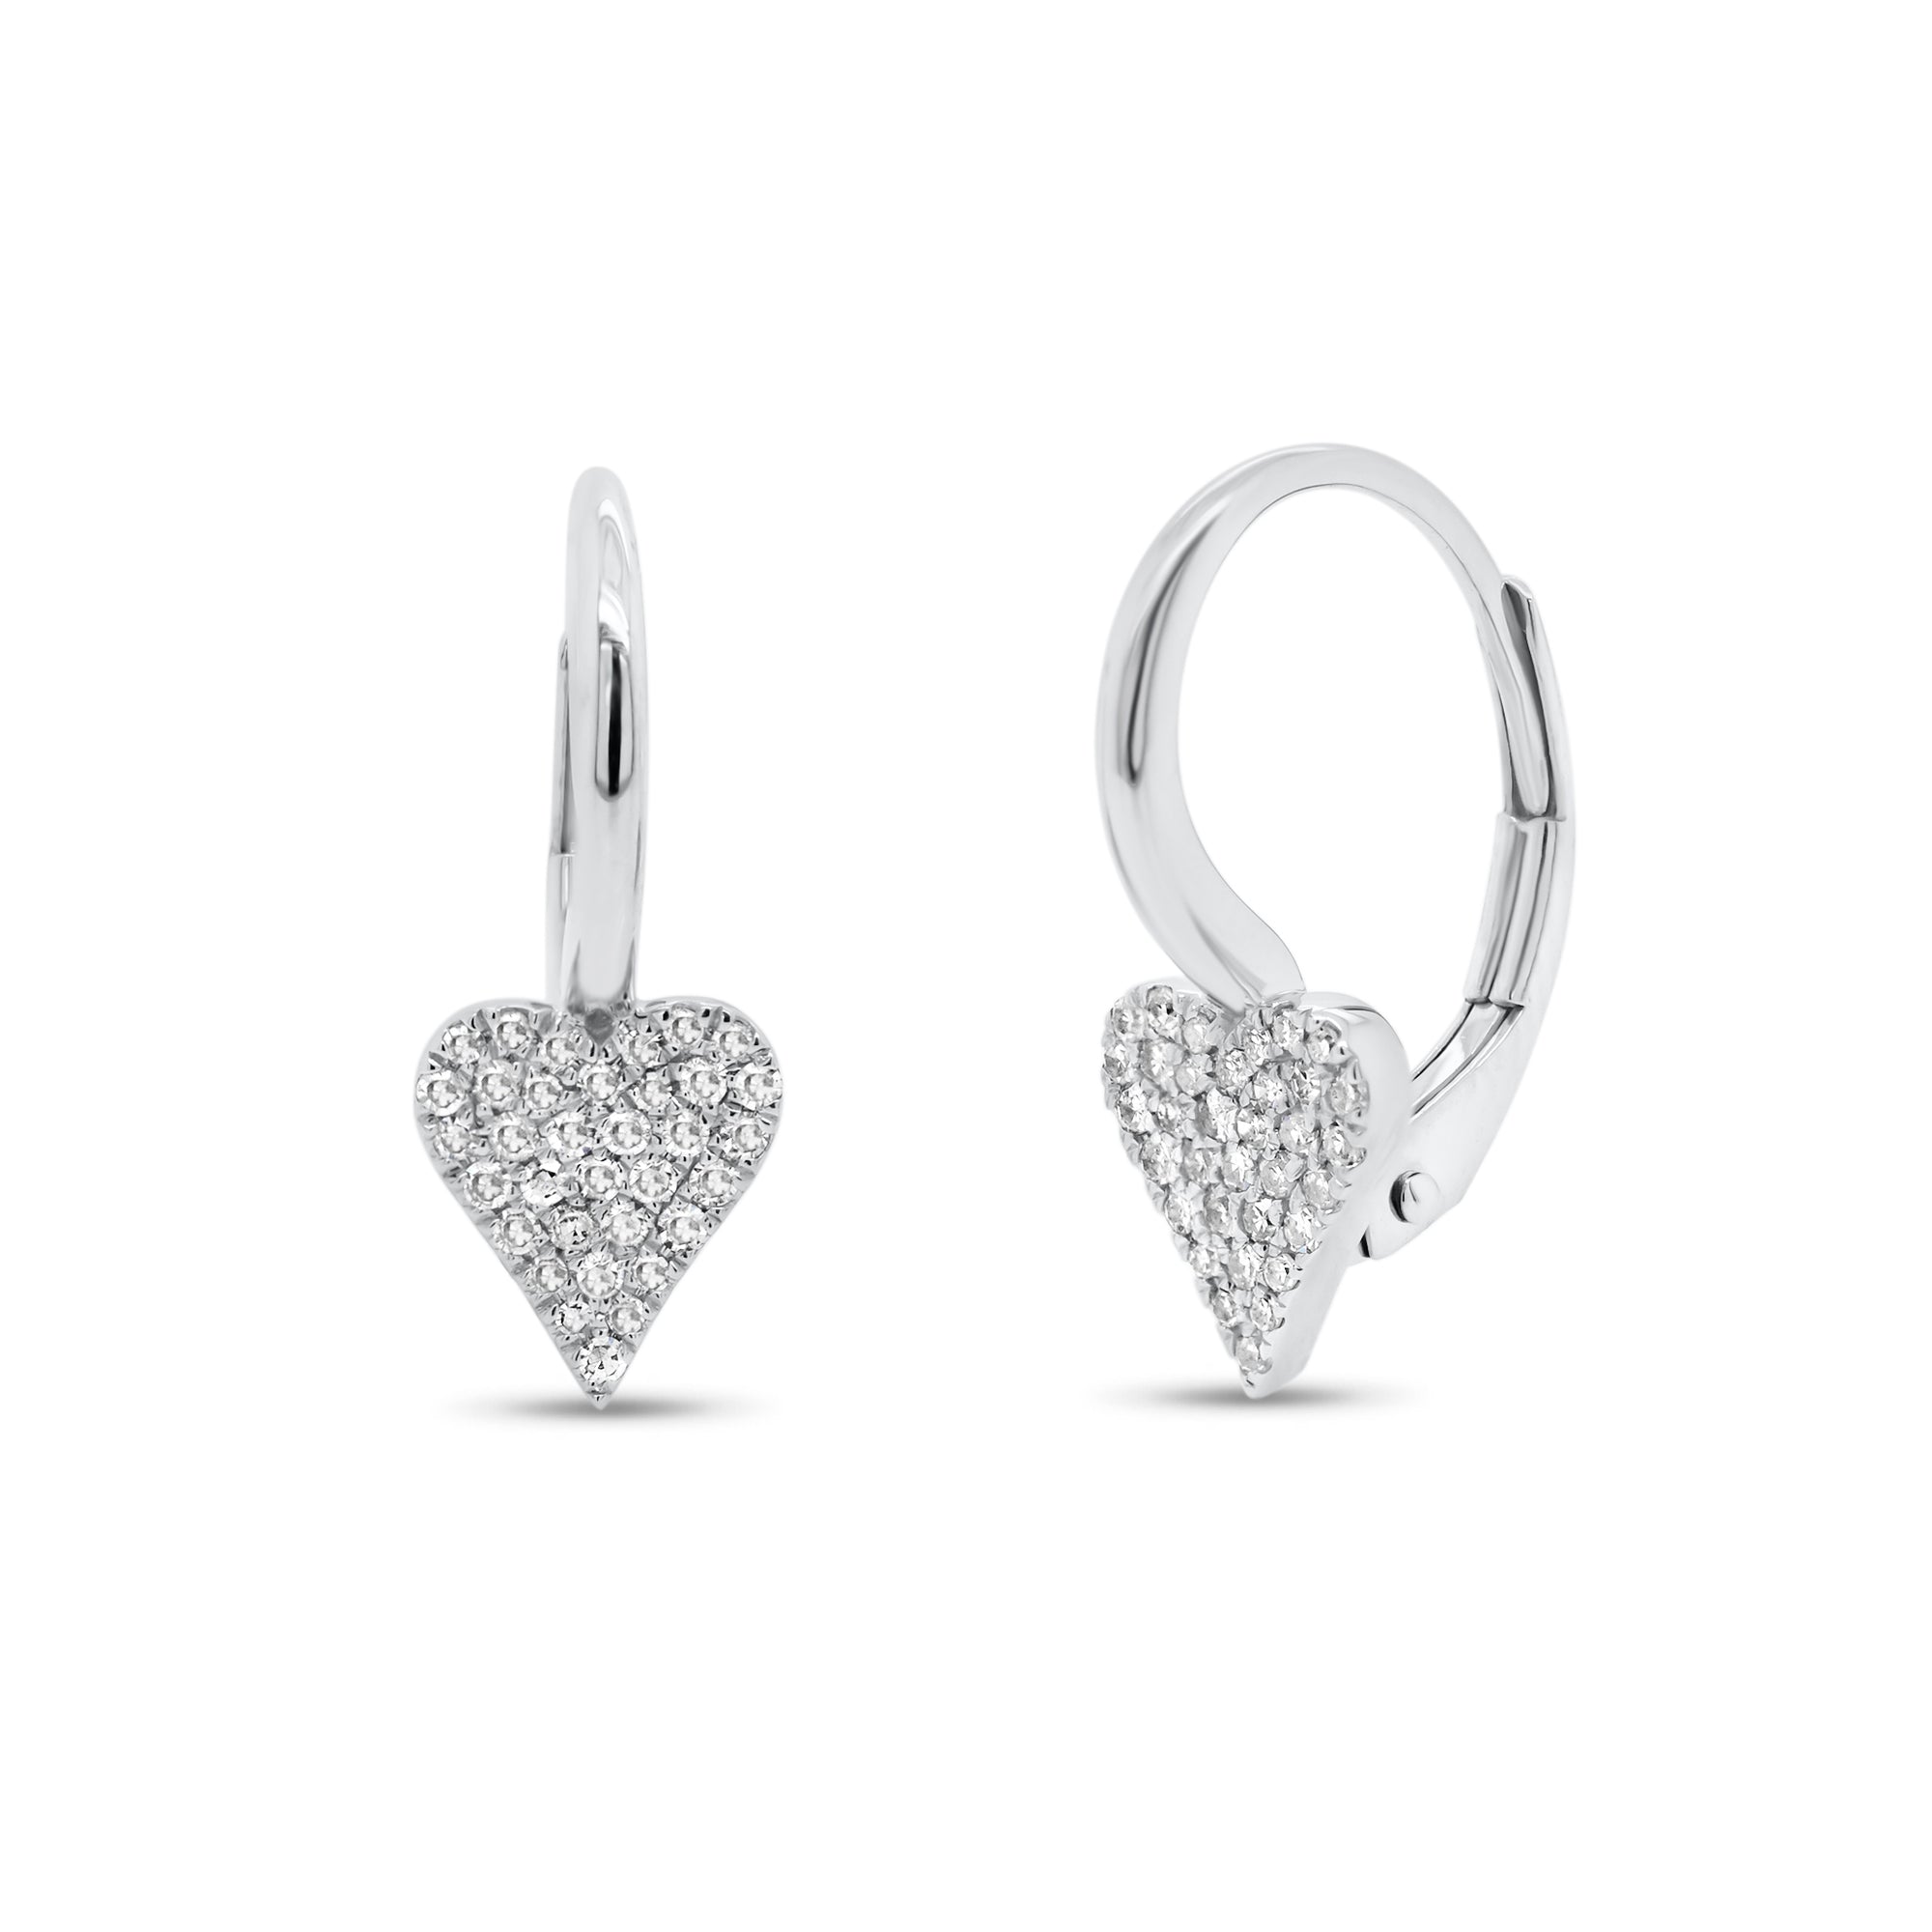 Pave Diamond Heart Lever-Back Earrings  - 14K gold weighing 1.88 grams  - 68 round diamonds totaling 0.20 carats